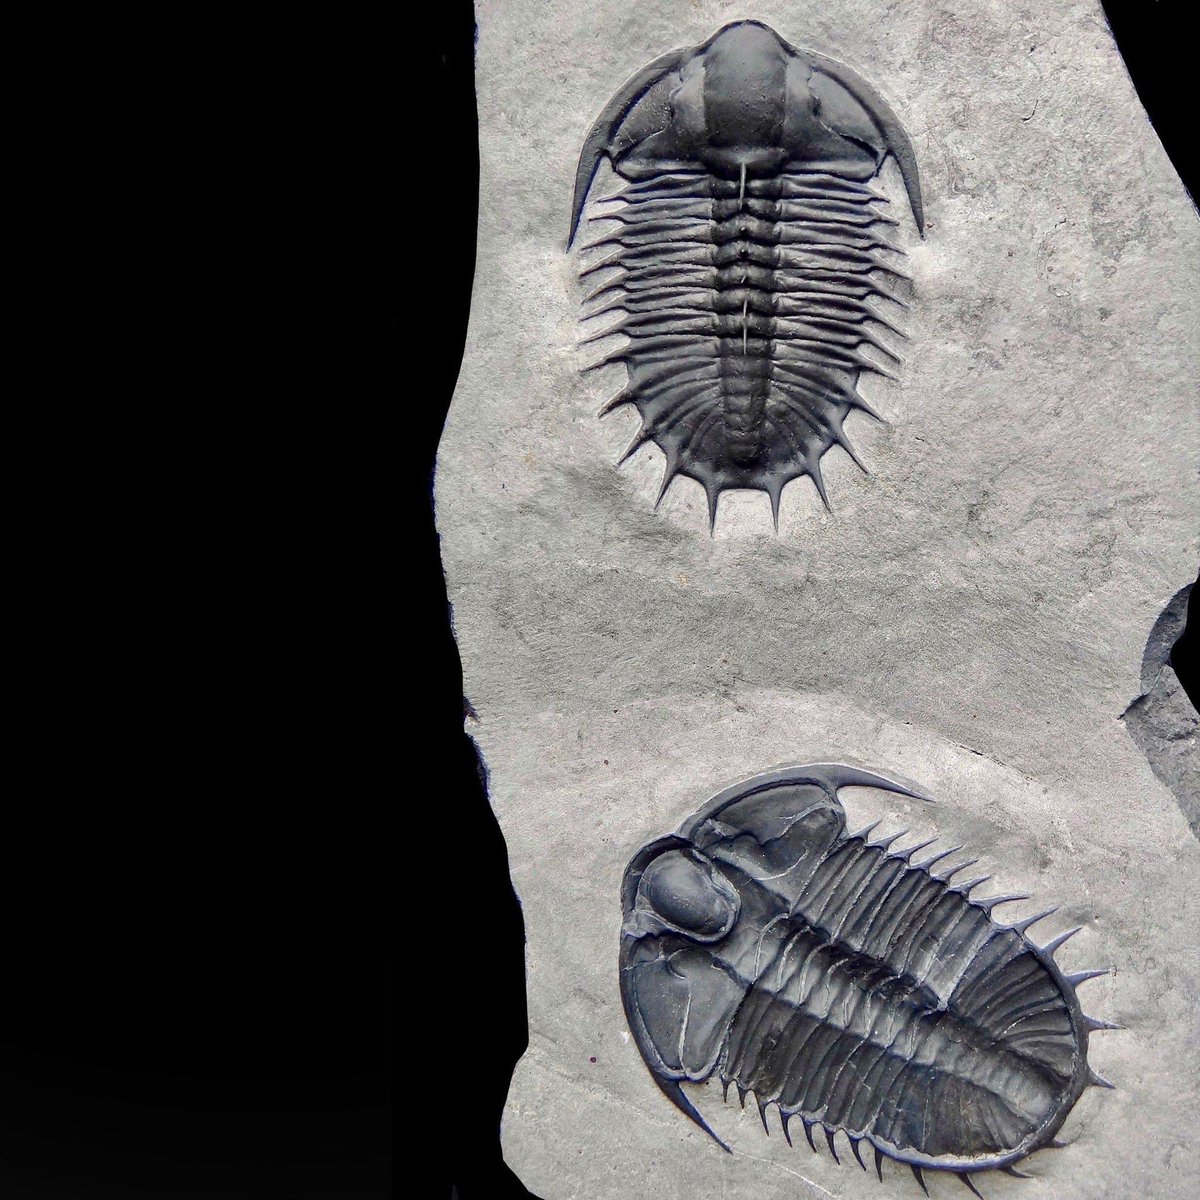 Happy Trilobite Tuesday! In recent years, the process of trilobite preparation has risen to new heights thanks to technological advancements. The detailed preparation of this pair of 500-million-year-old Olenoides superbus—featuring a row of free-standing spines running along the